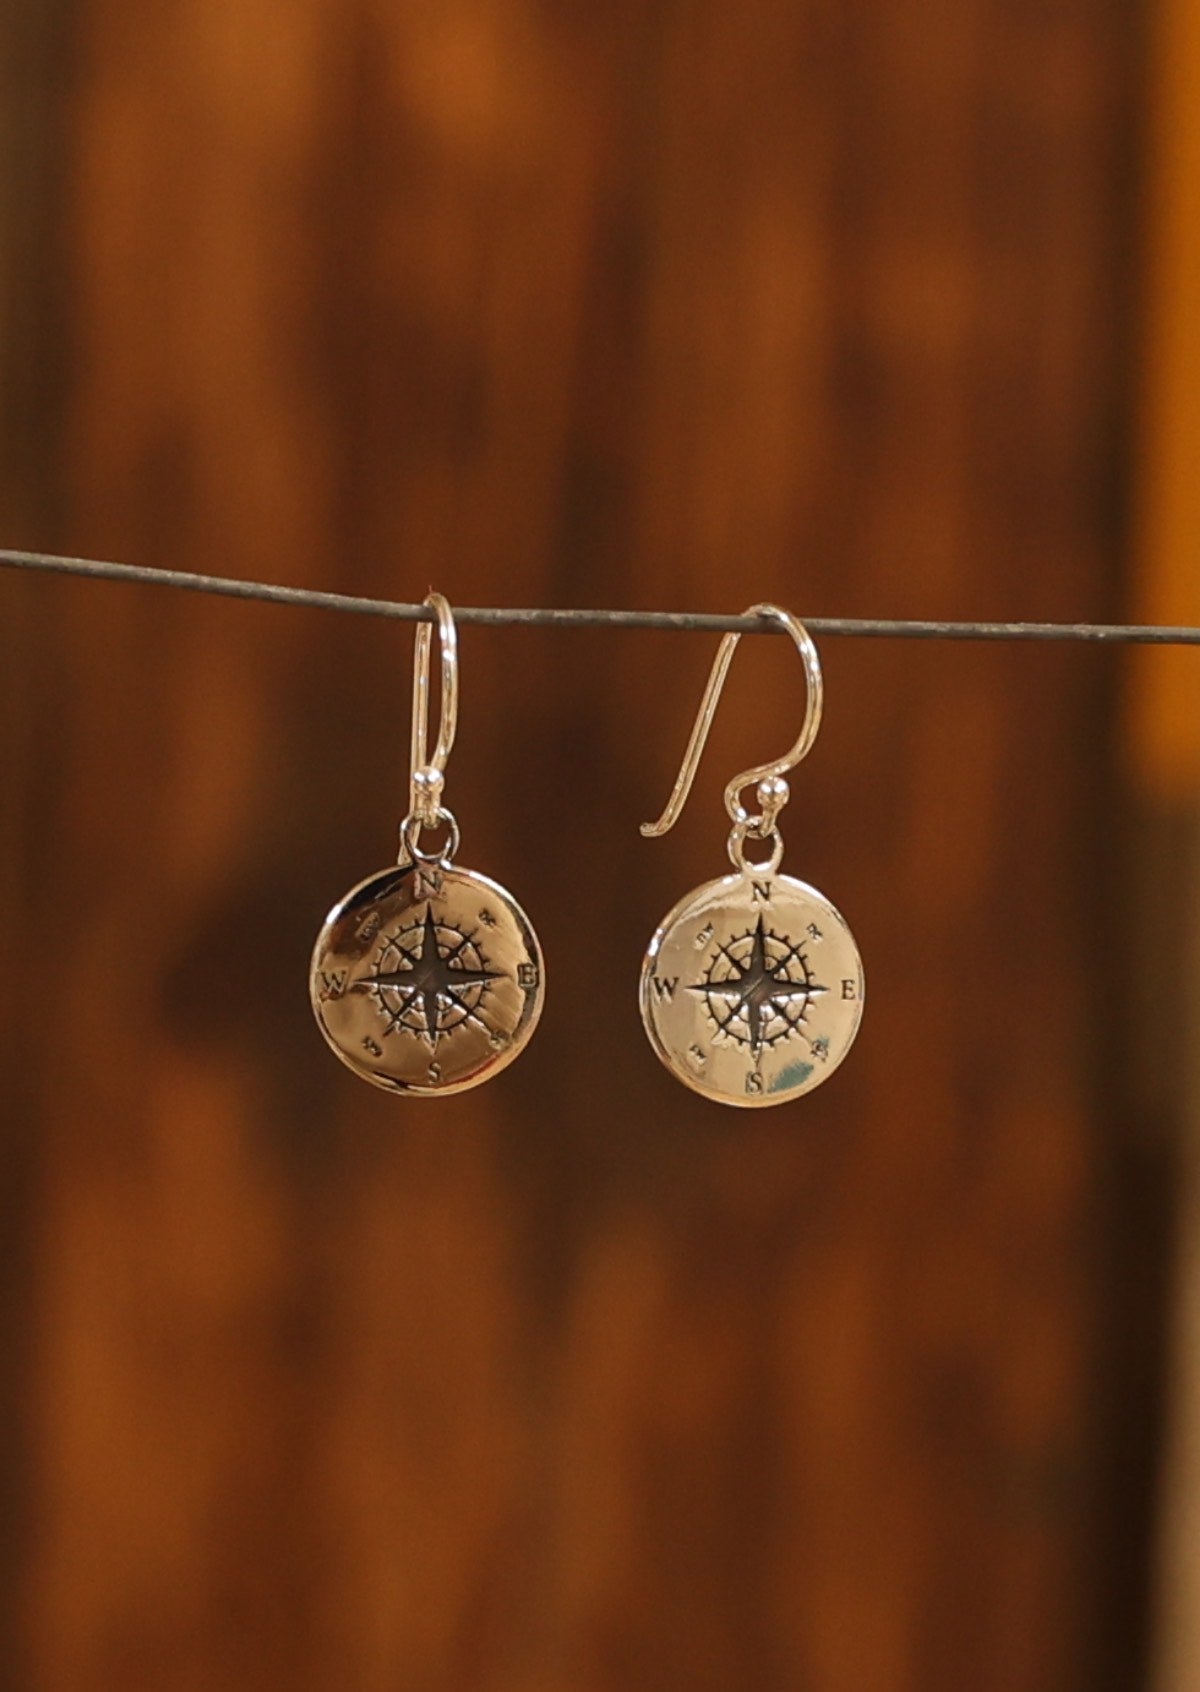 Silver hook earrings with compass disc